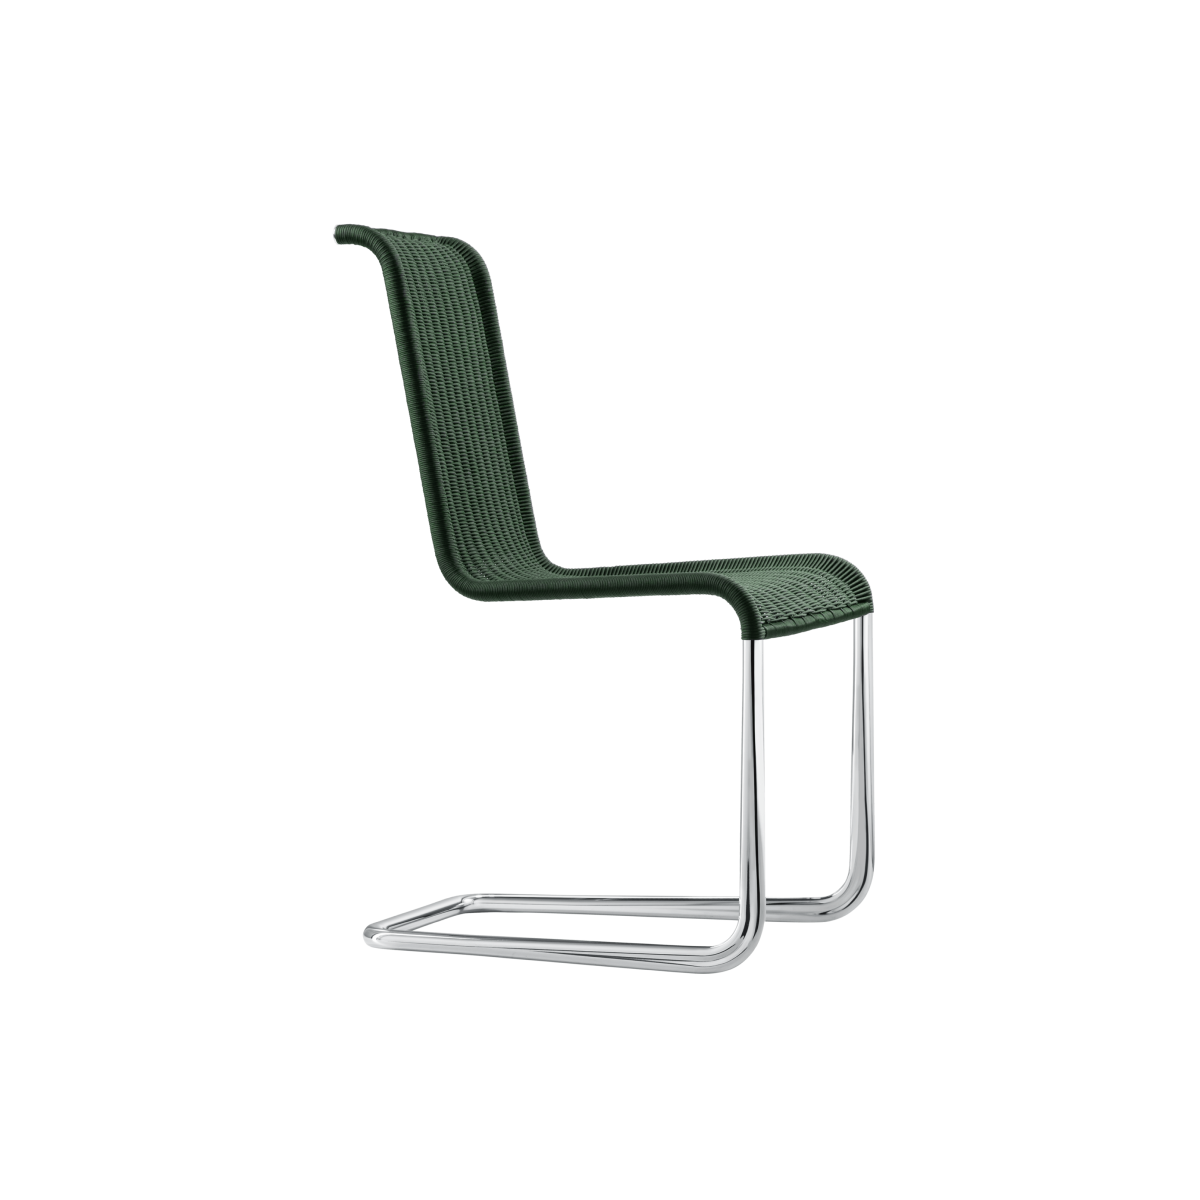 TECTA B20 Cantilever Chair (12colors)